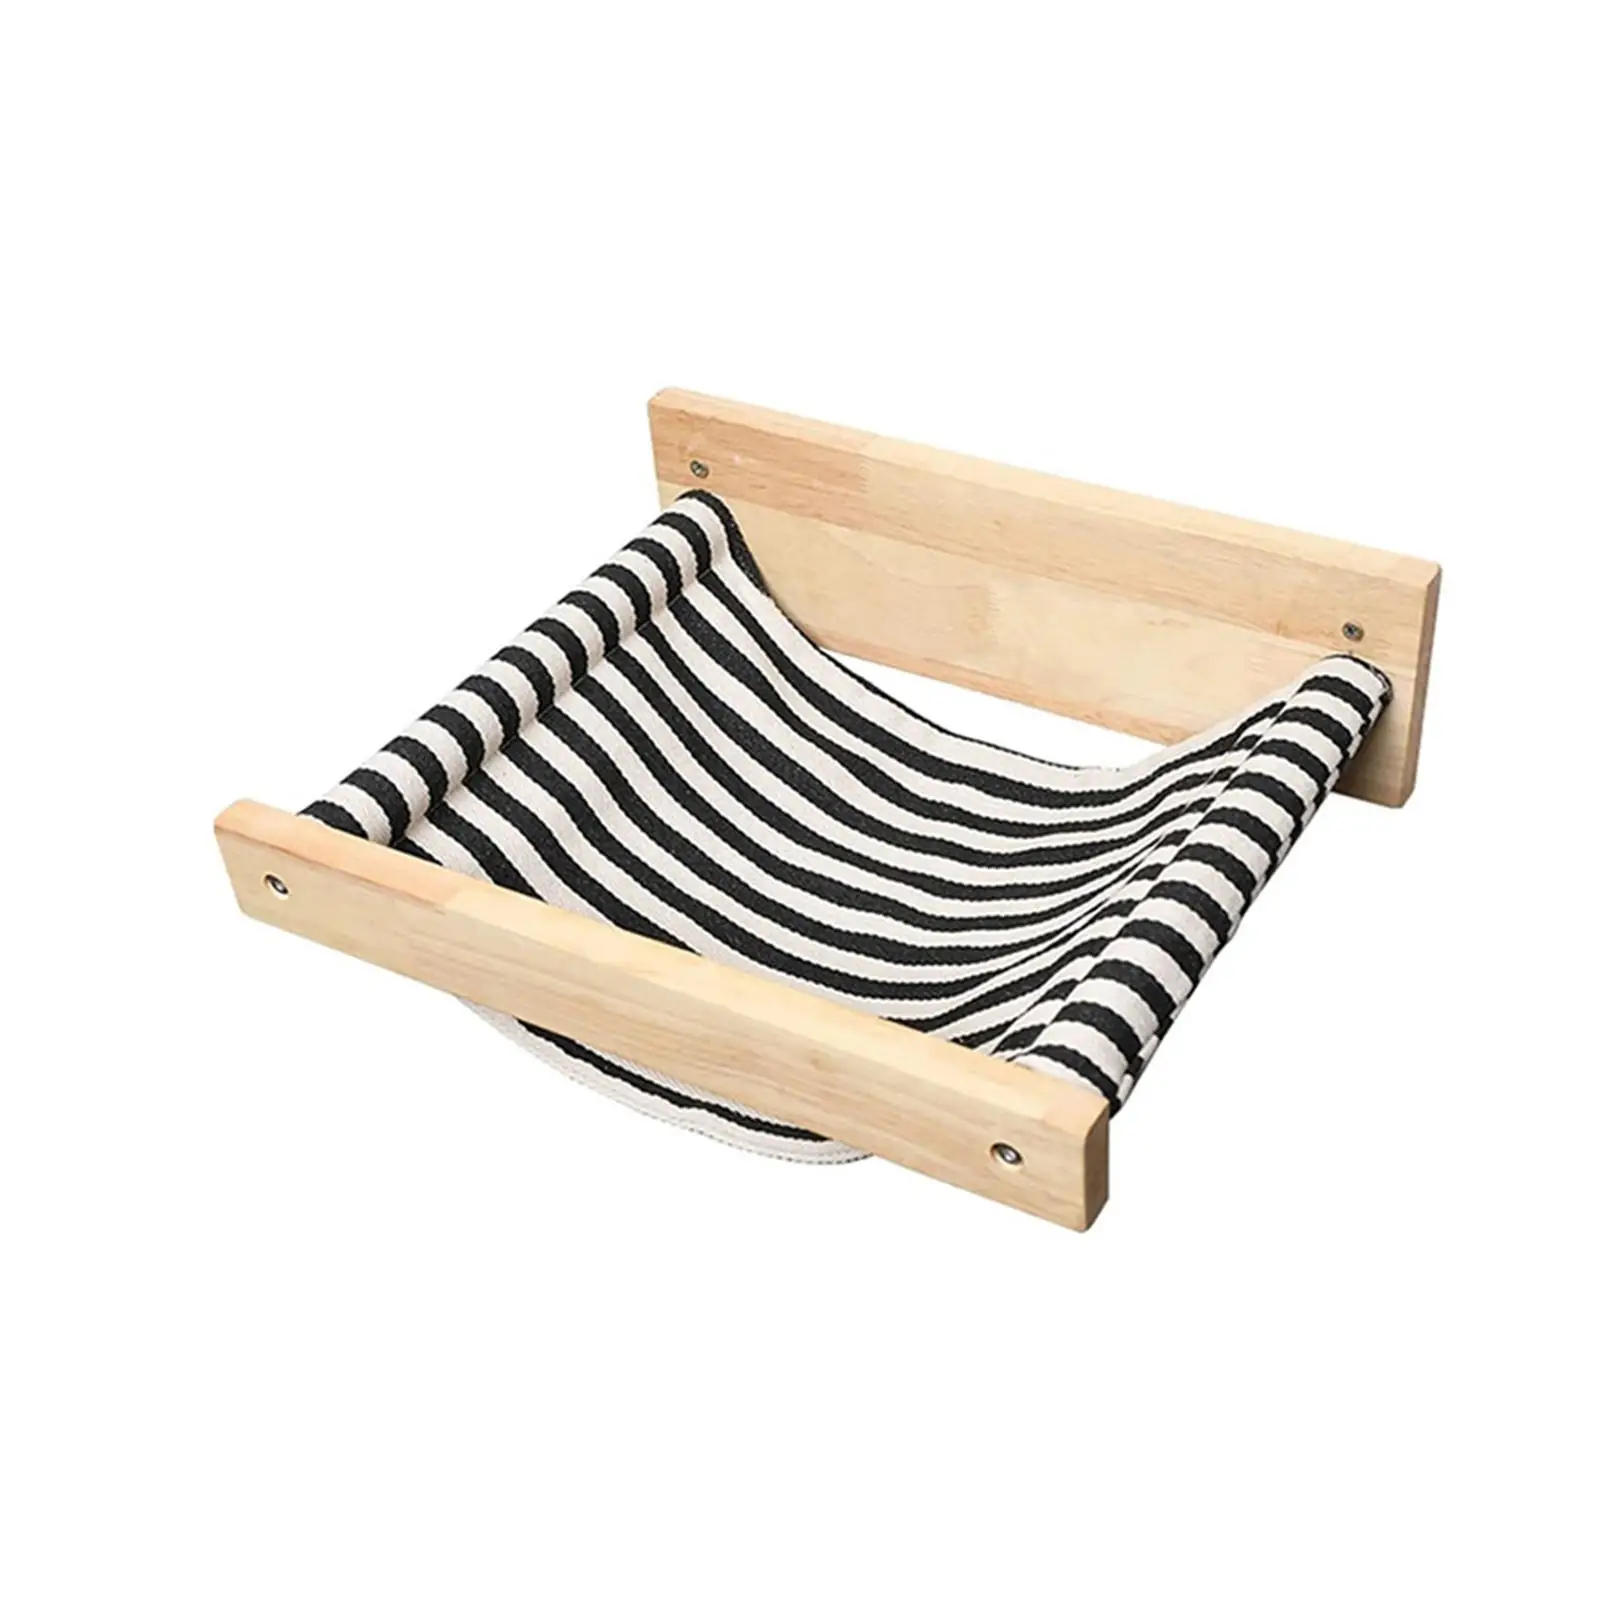 Cat Hammock Wall Mounted Sleeping Solid Comfortable Playing Lounging Pet Cat Bed Black Stripe Cat Shelves Kitty Beds Perches